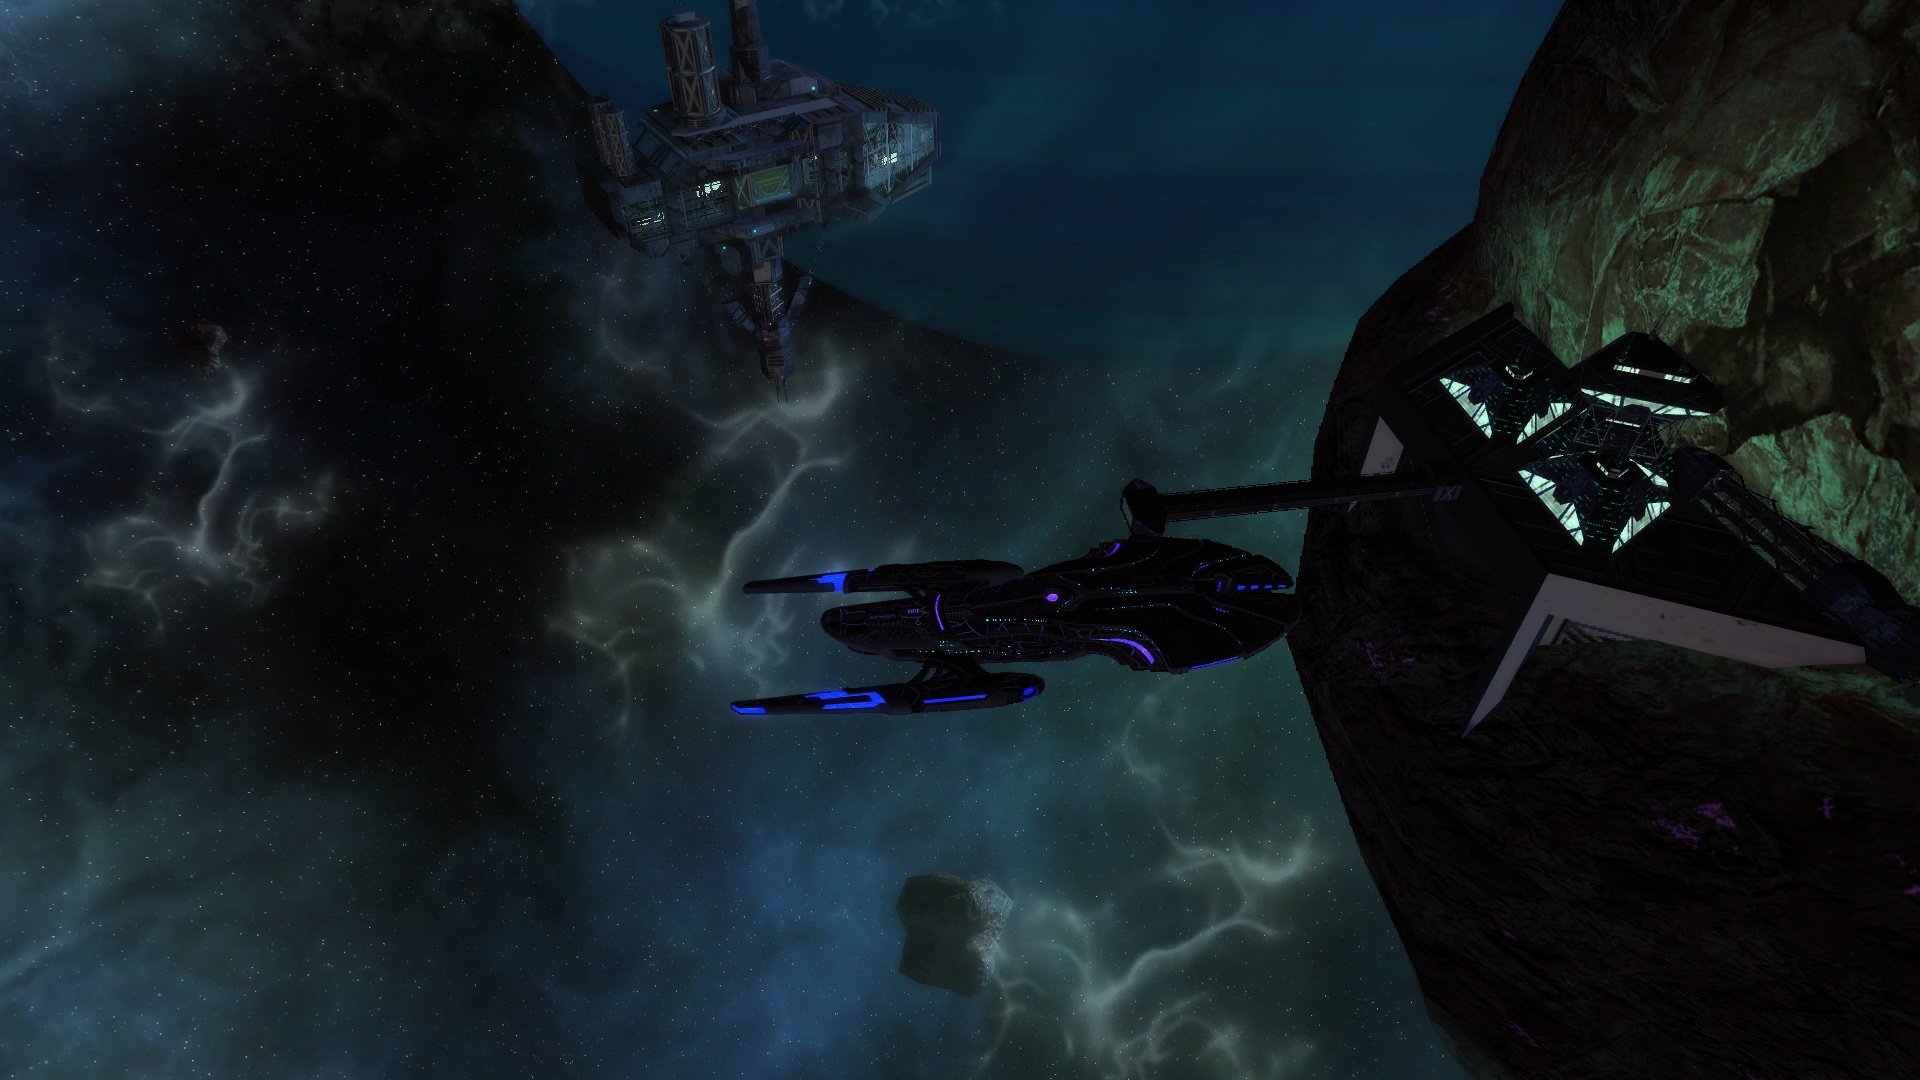 Awesome Star Trek Video Game free background ID:276296 for hd 1080p desktop